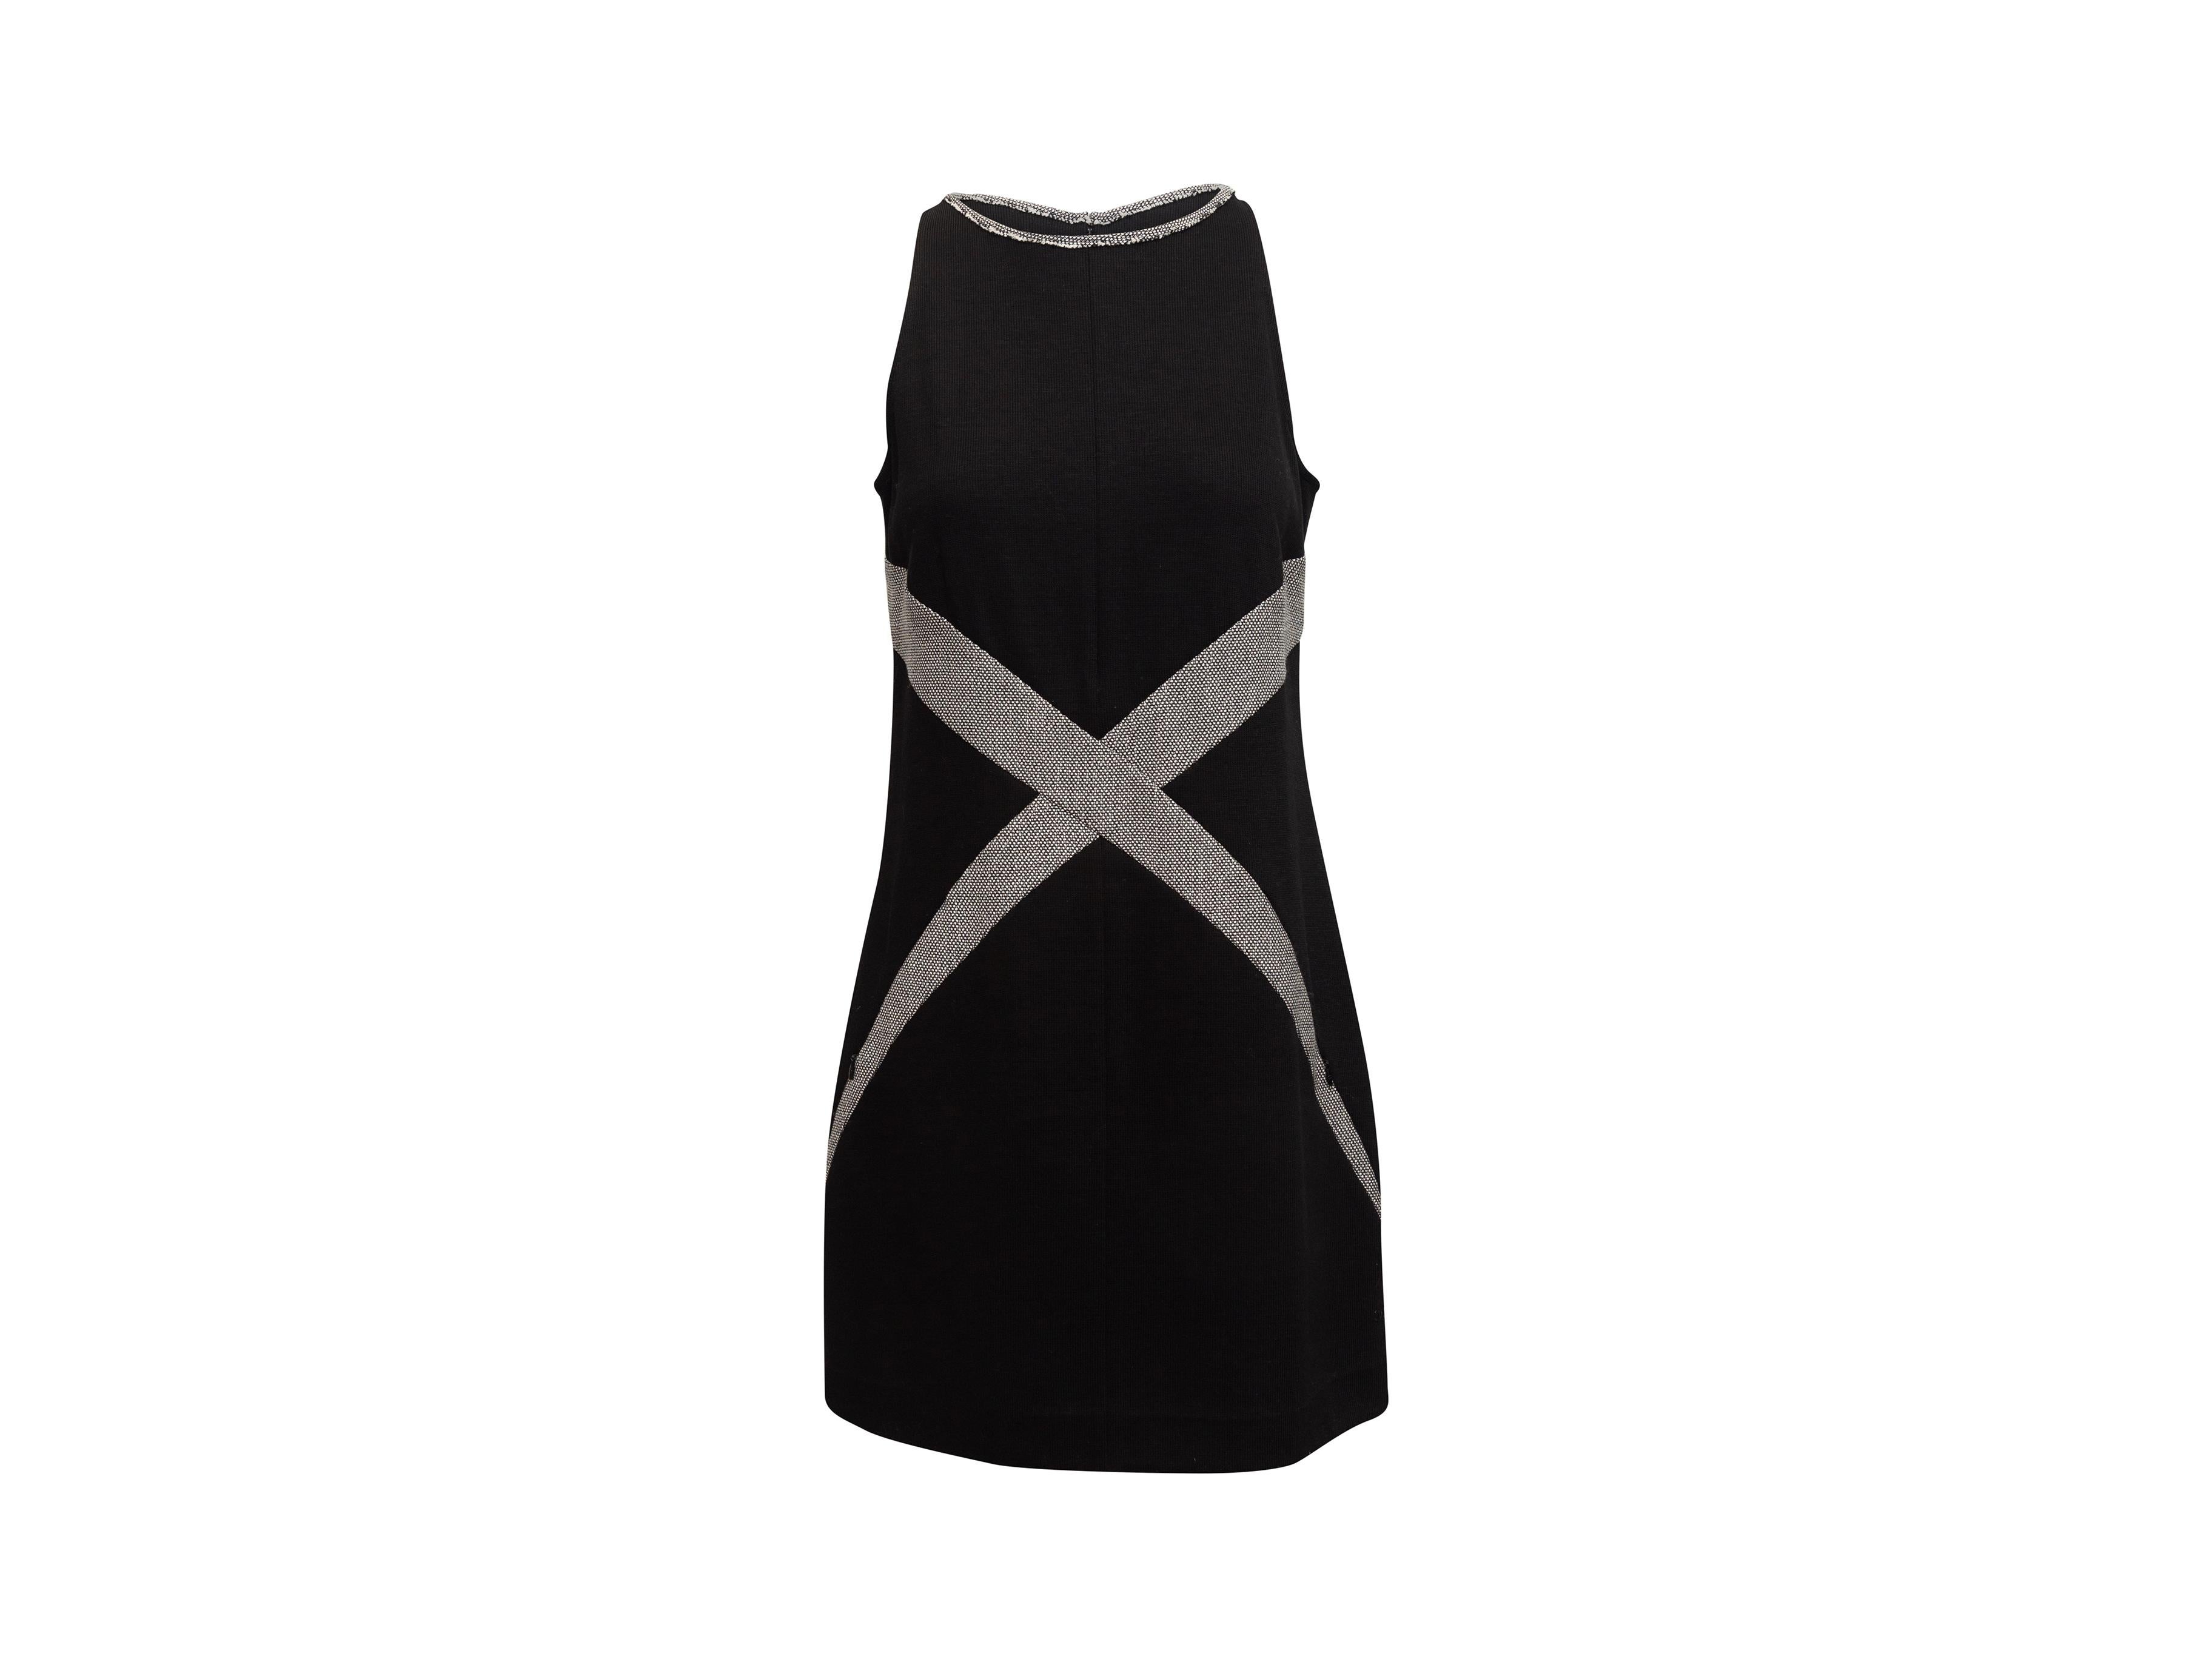 Product details: Black and grey sleeveless dress by Chanel. Crew neck. Zip closure at center back. Designer size 40. 34